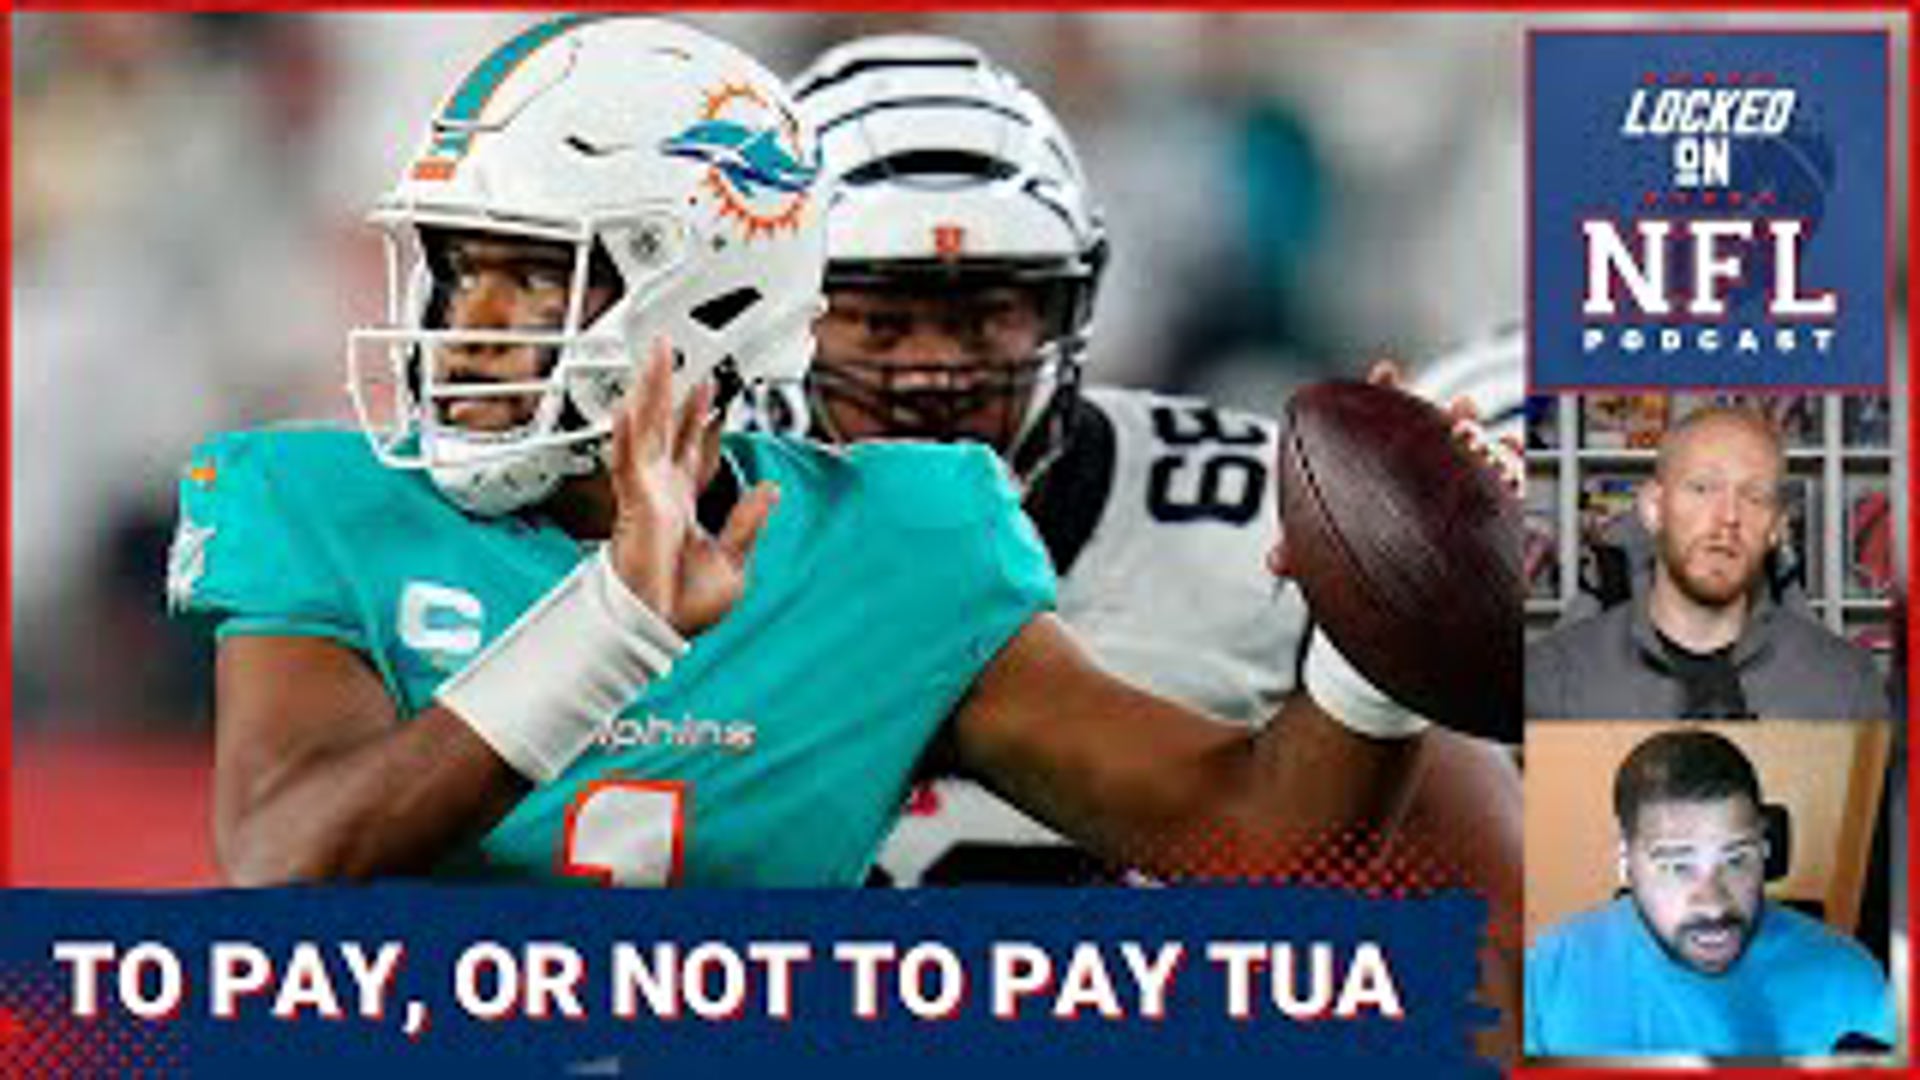 The Miami Dolphins have a decision to make ahead about paying quarterback Tua Tagovailoa after seeing how the Jacksonville Jaguars paid Trevor Lawrence.